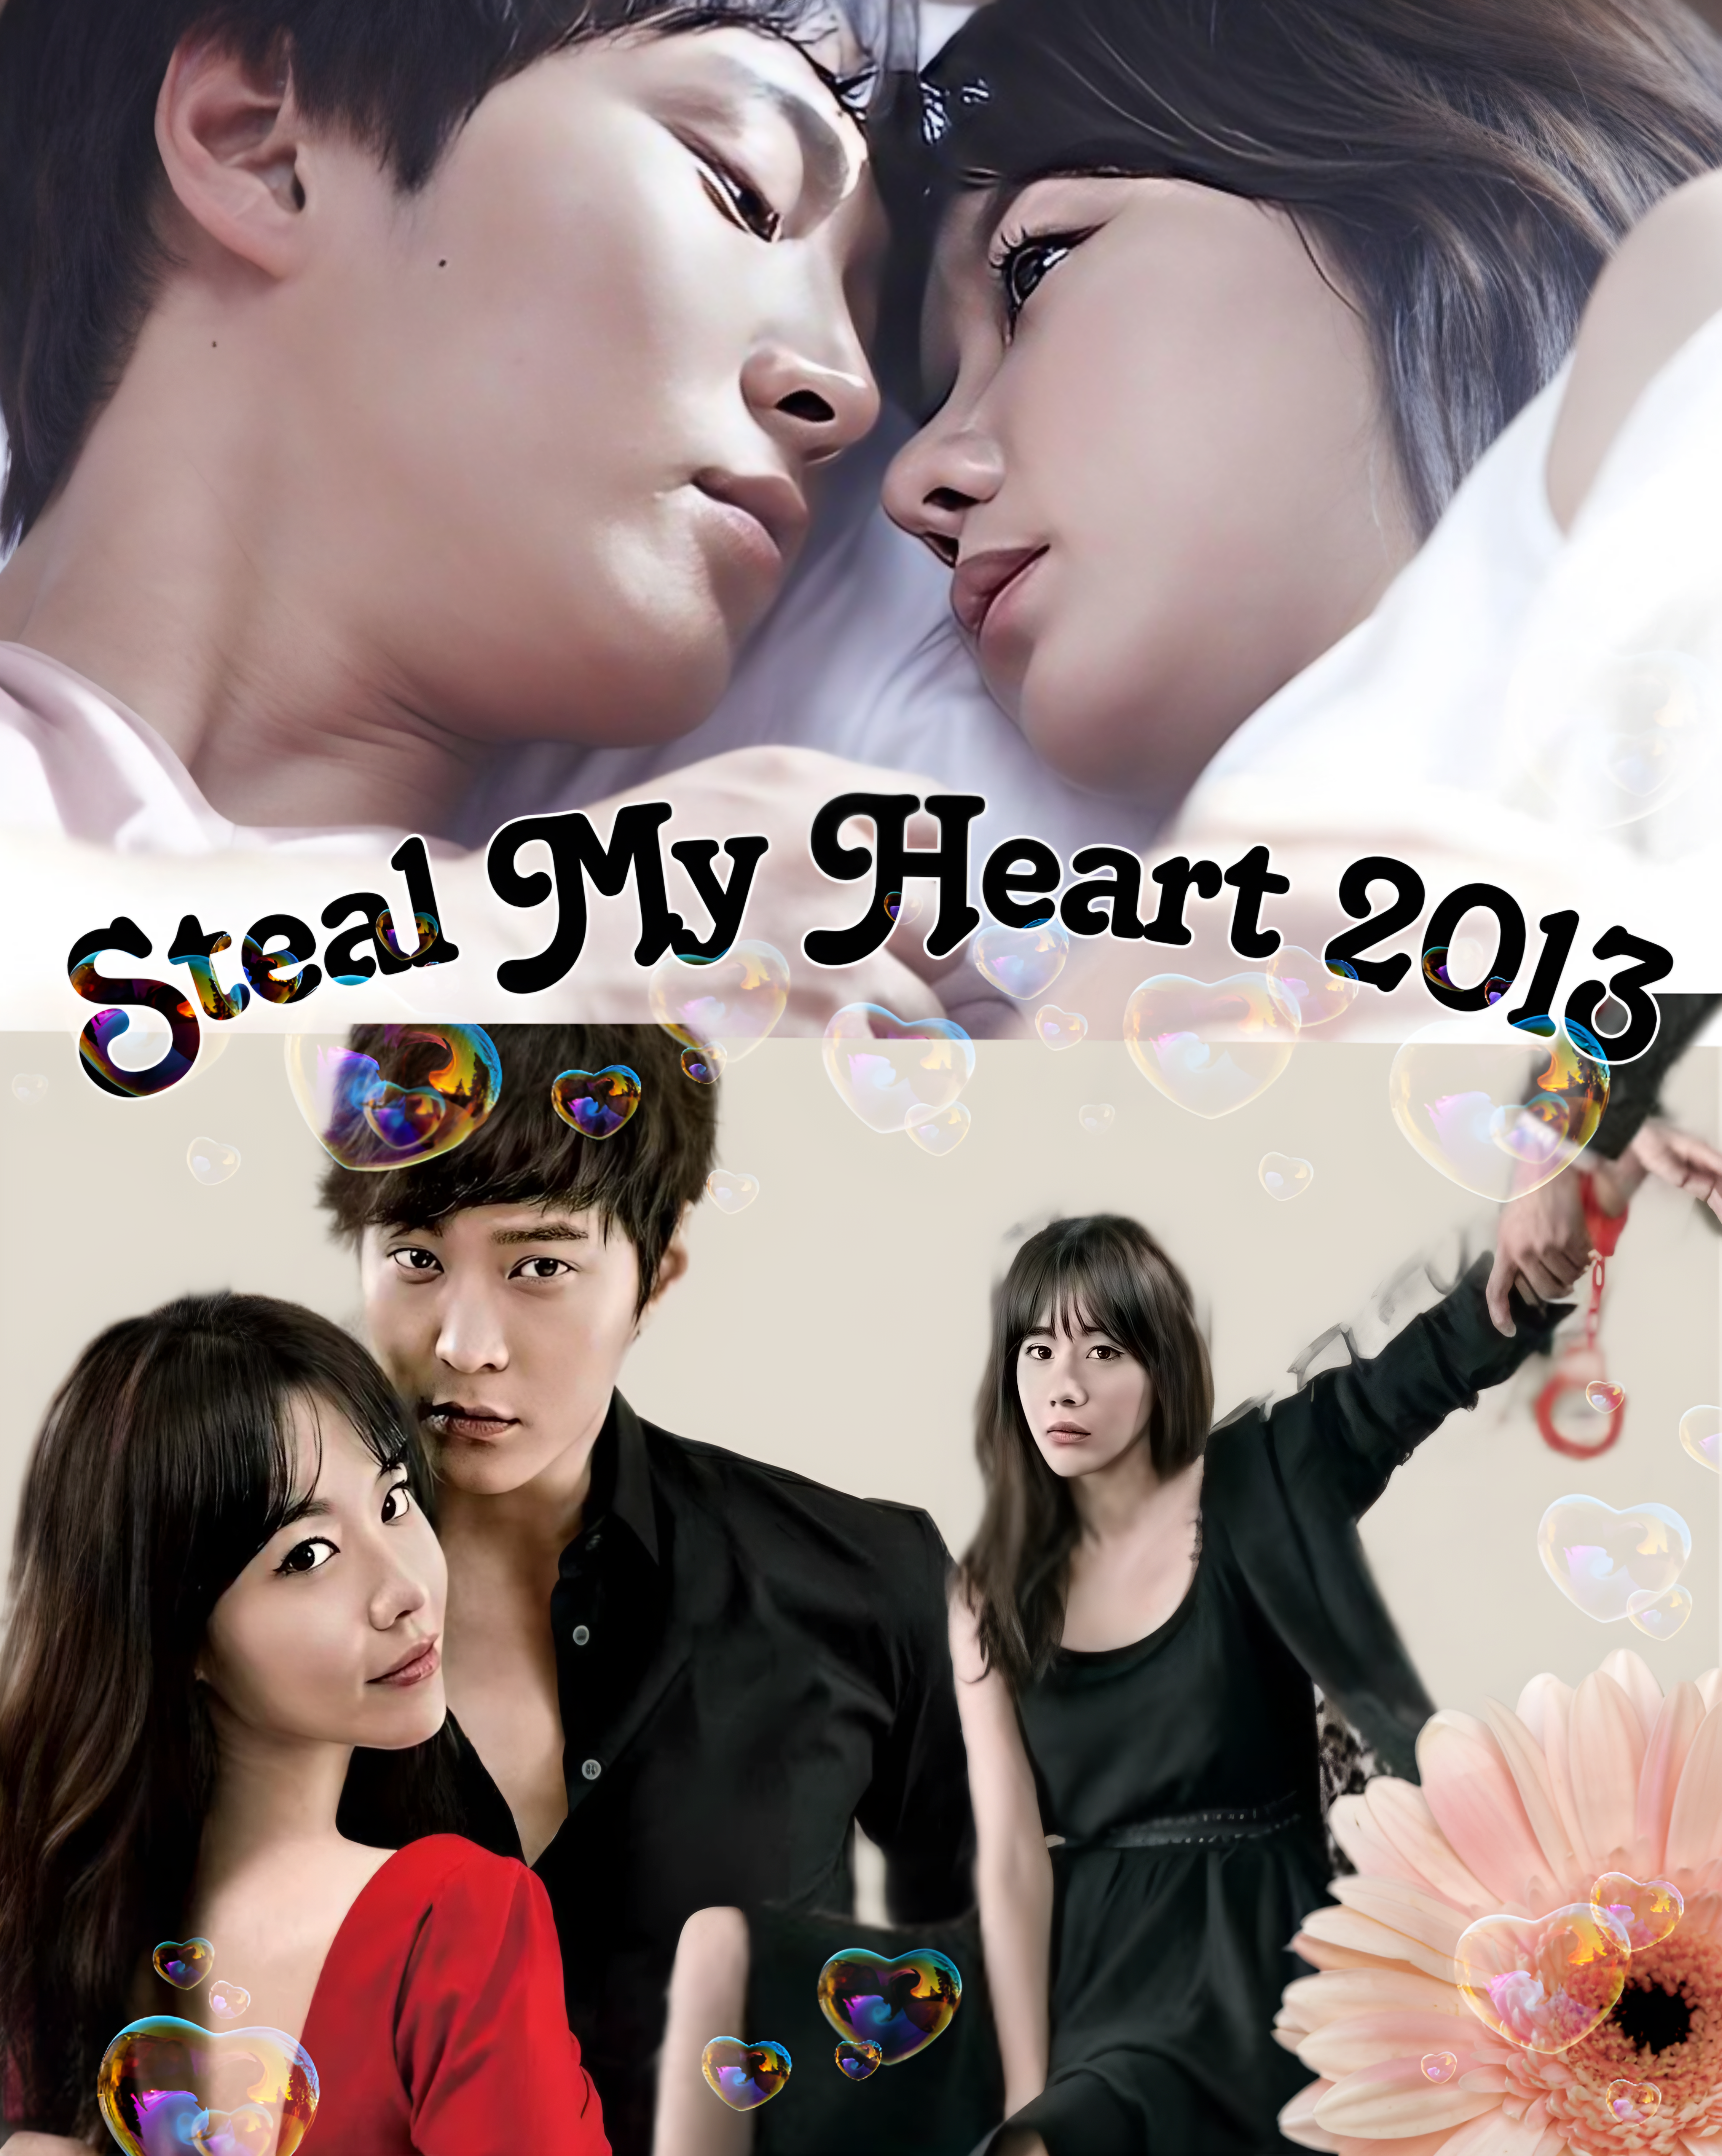 Steal My Heart 2013